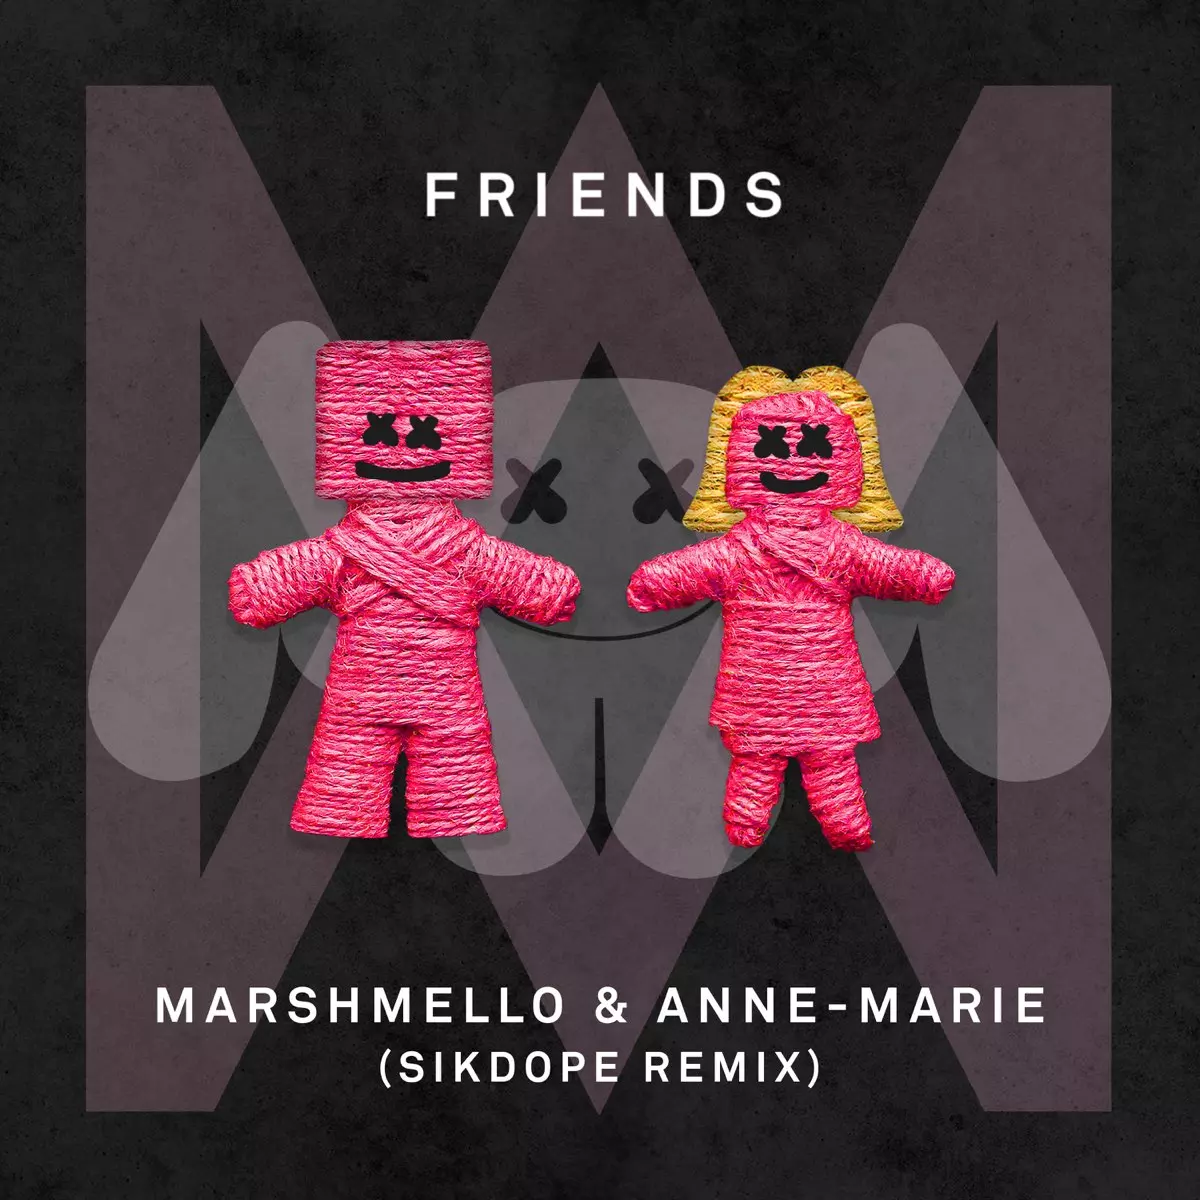 FRIENDS (Sikdope Remix) - Single by Marshmello & Anne-Marie on Apple Music